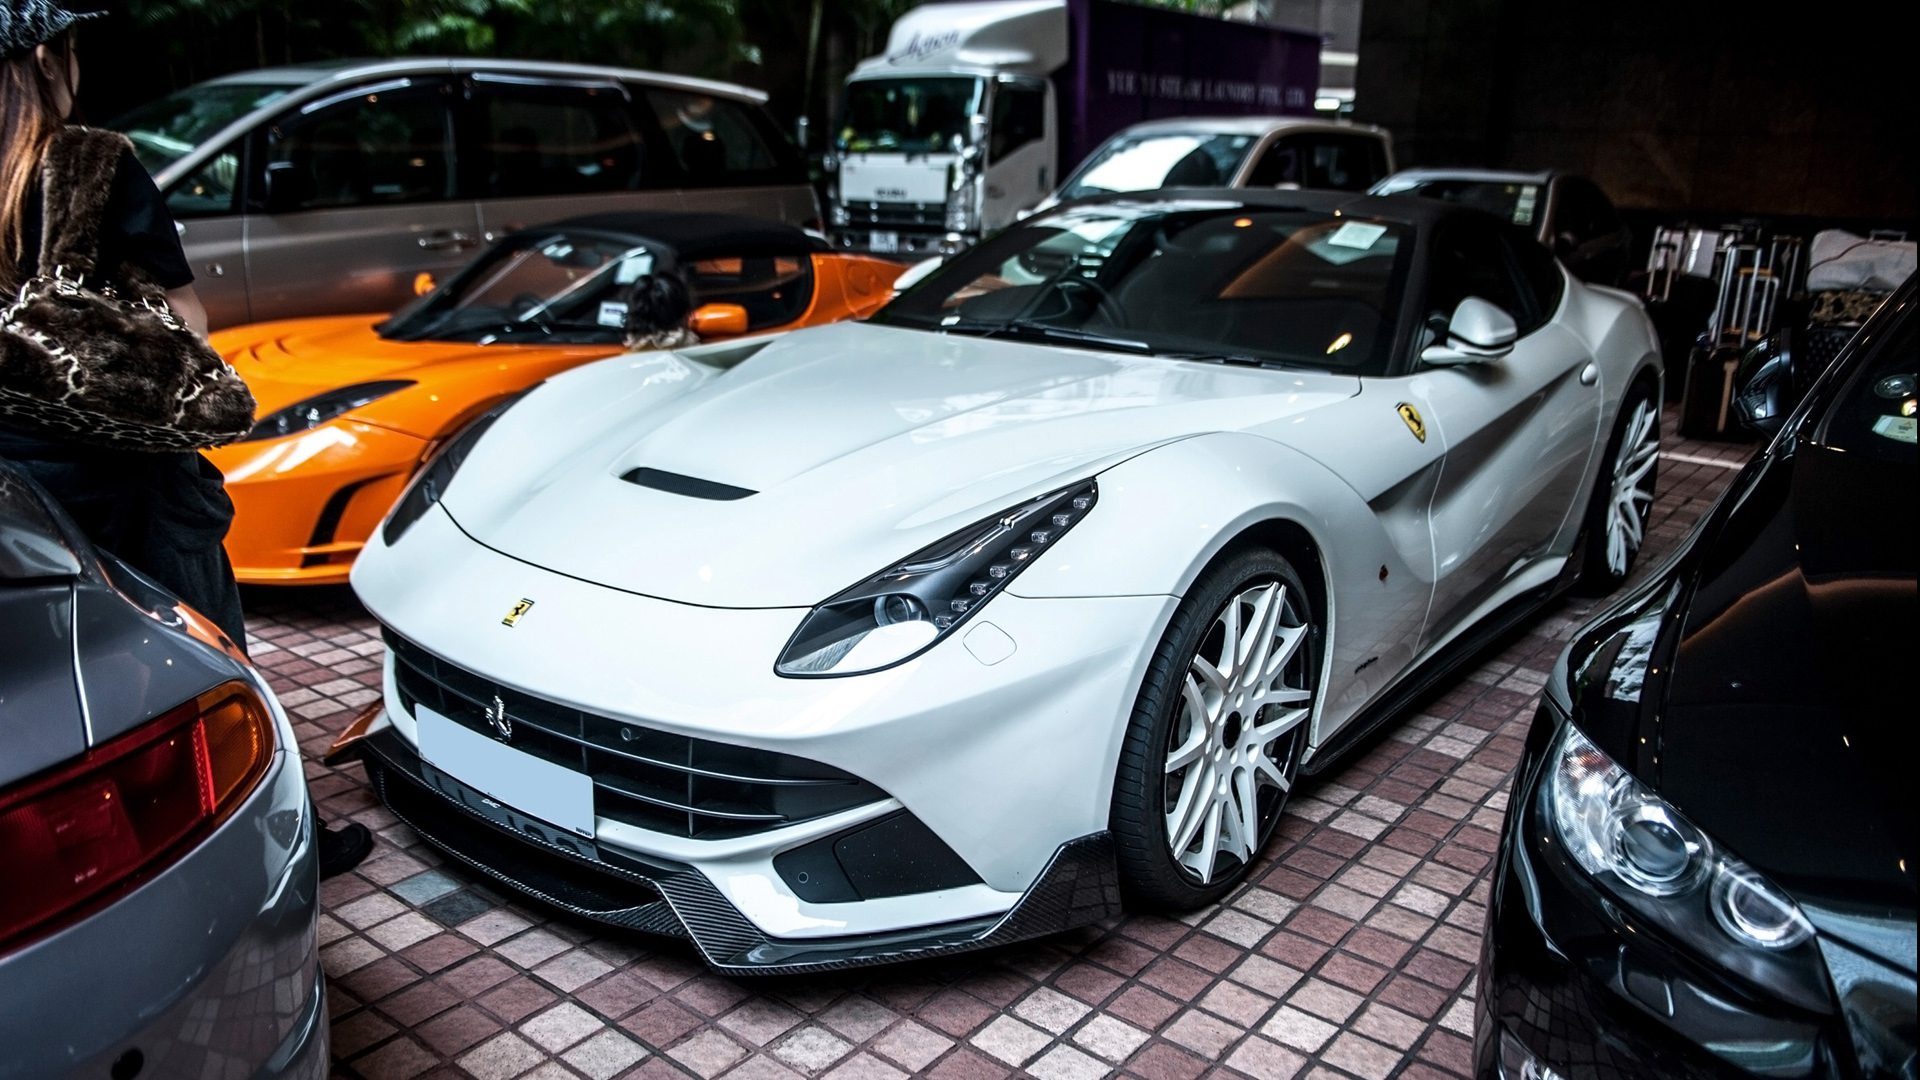 Exotic Car Tuner Dmc Released A Couple Of New Pictures - Ferrari F12 Berlinetta Kit , HD Wallpaper & Backgrounds